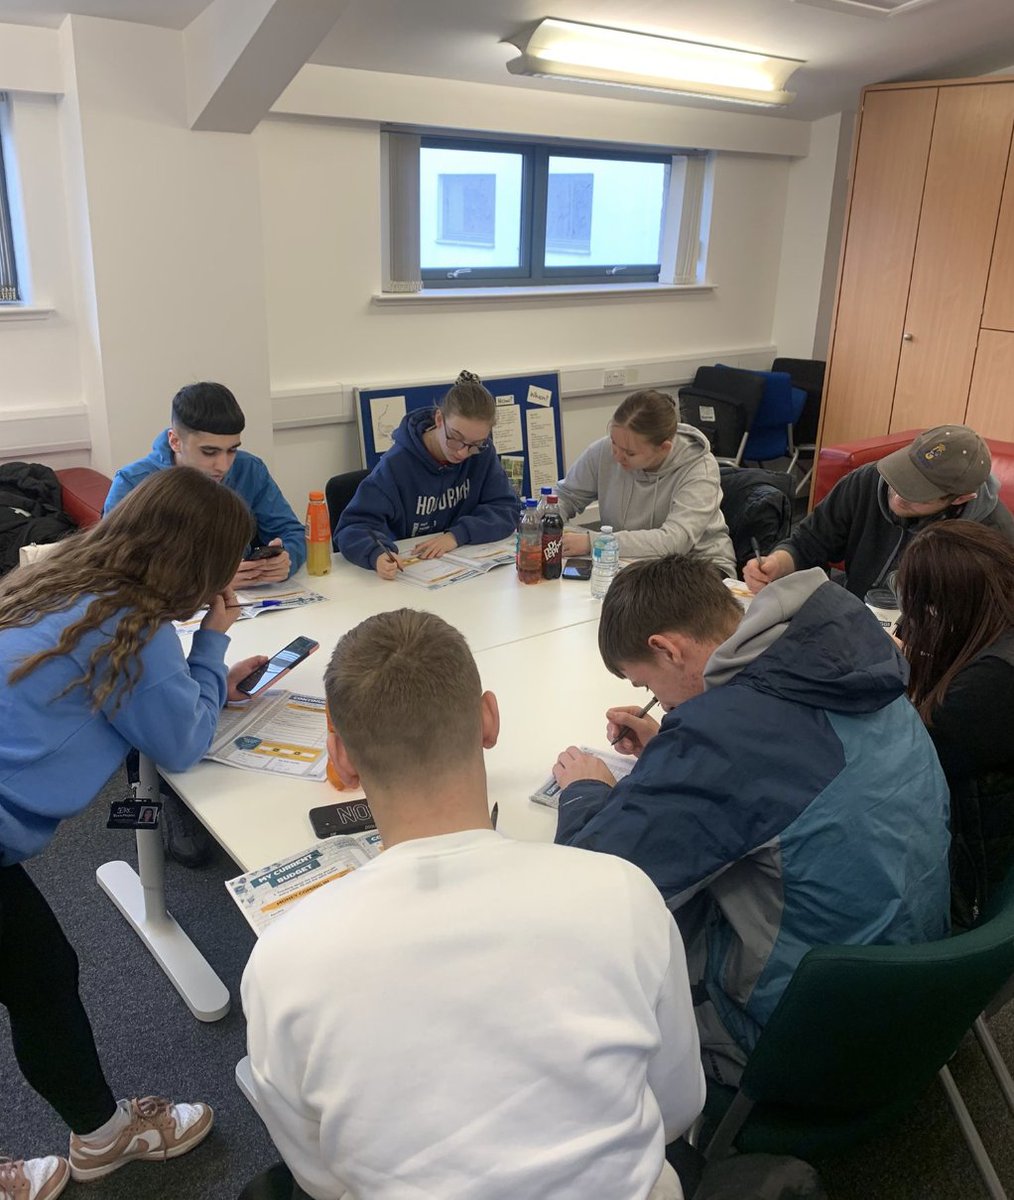 Great turn out for today's personal money management training session with the brilliant @MyBnk @MyBnkScotland! Our @pathfindjobs4u trainees all had the heads down & were working hard through the session content with Adam. Quick lunch break now then back into action! #youthwork